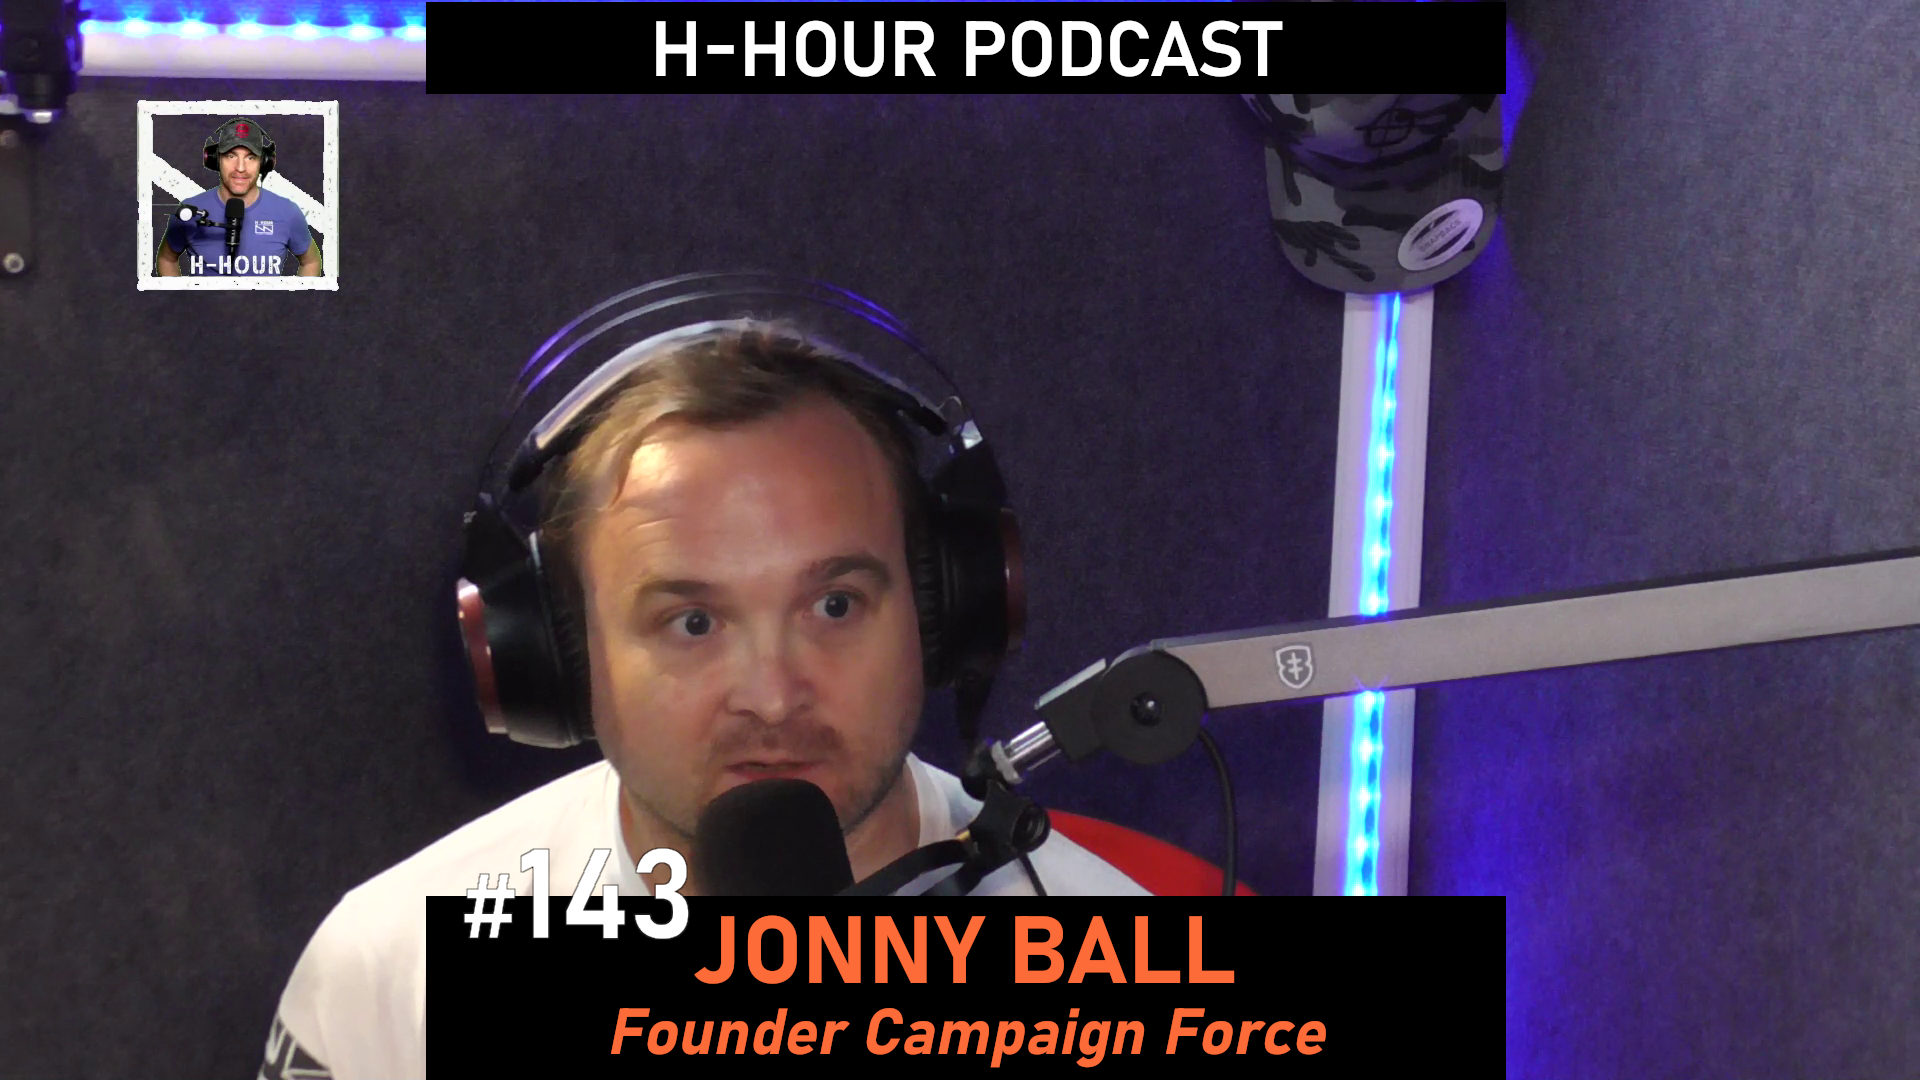 jonny ball of campaign force on the h-hour podcast